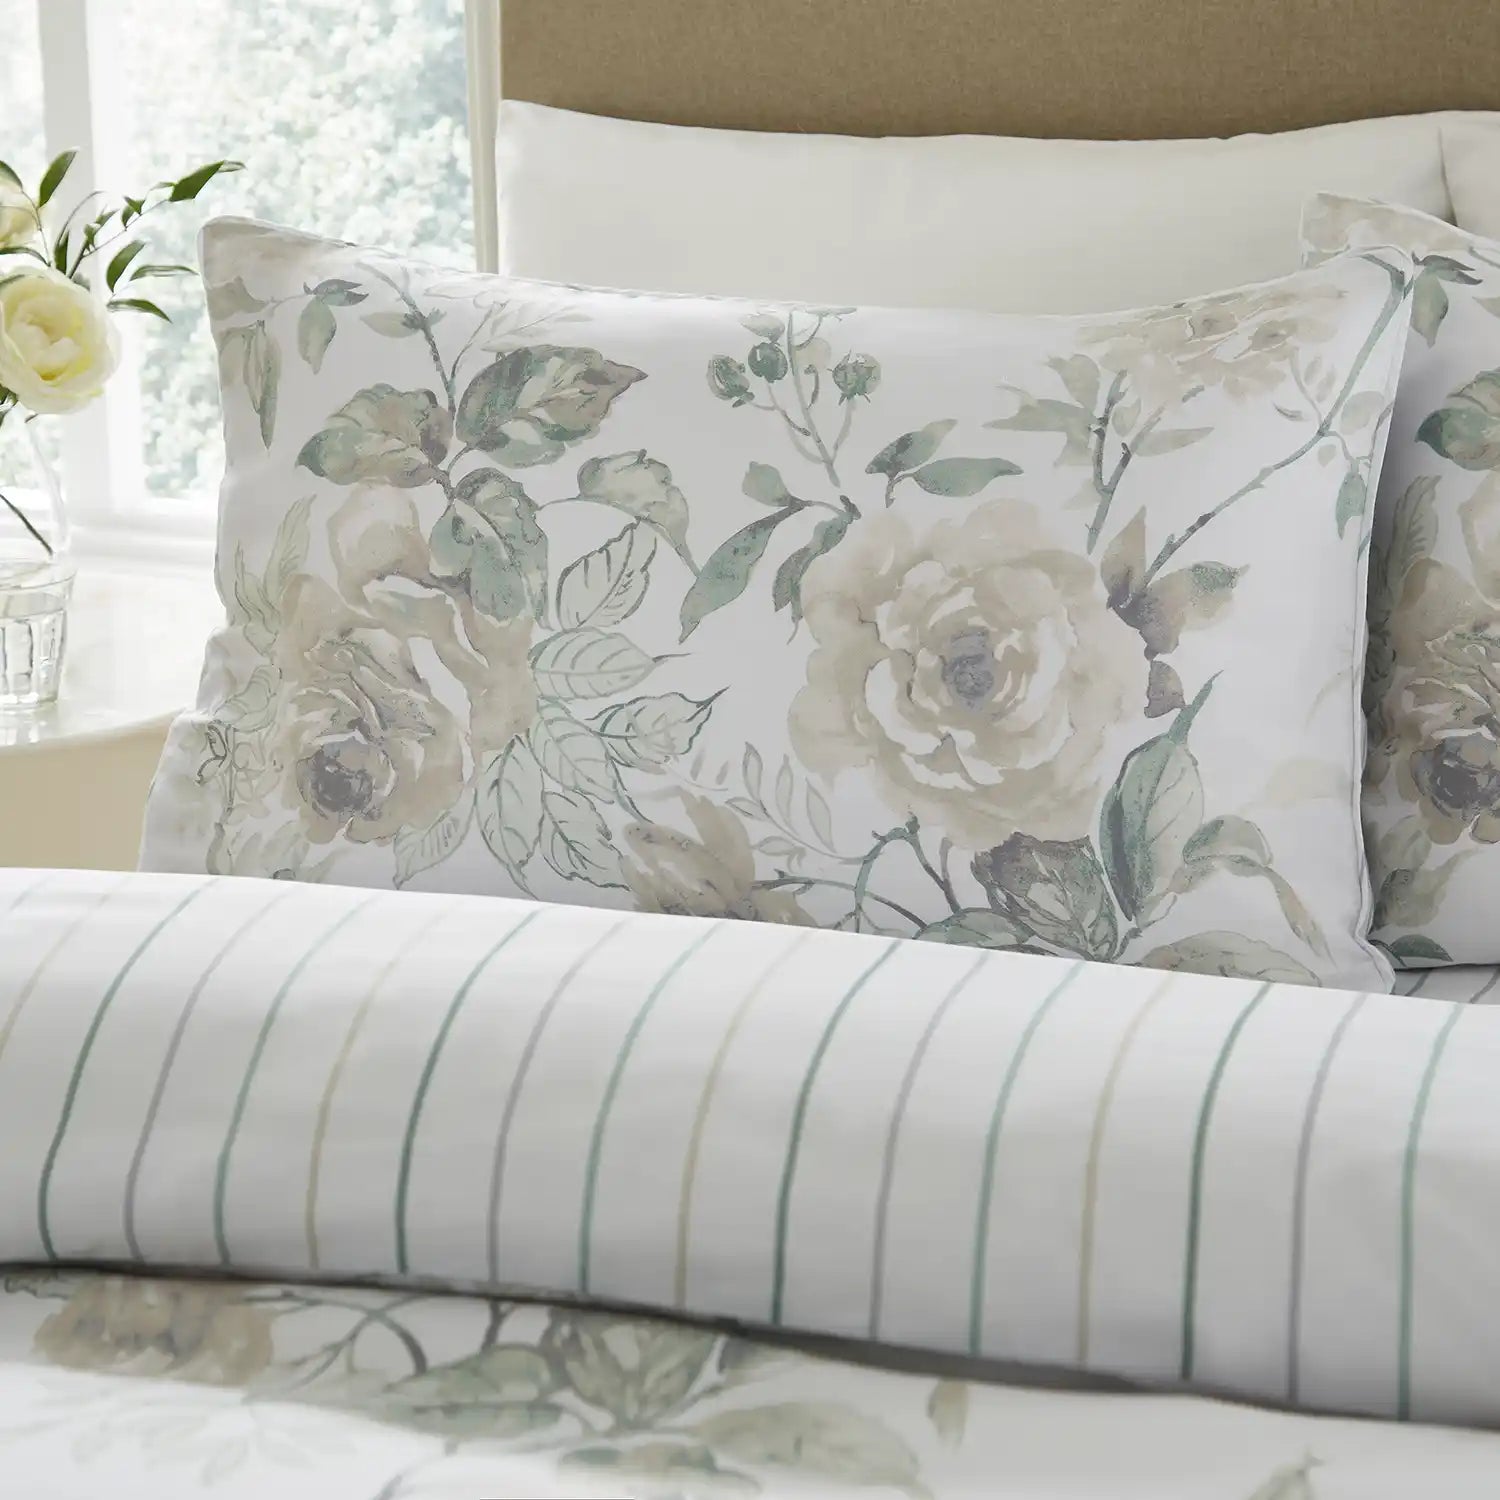 Dorma Ellesa Floral Pillowcase - Natural/Floral - Housewife Style 1 Shaws Department Stores